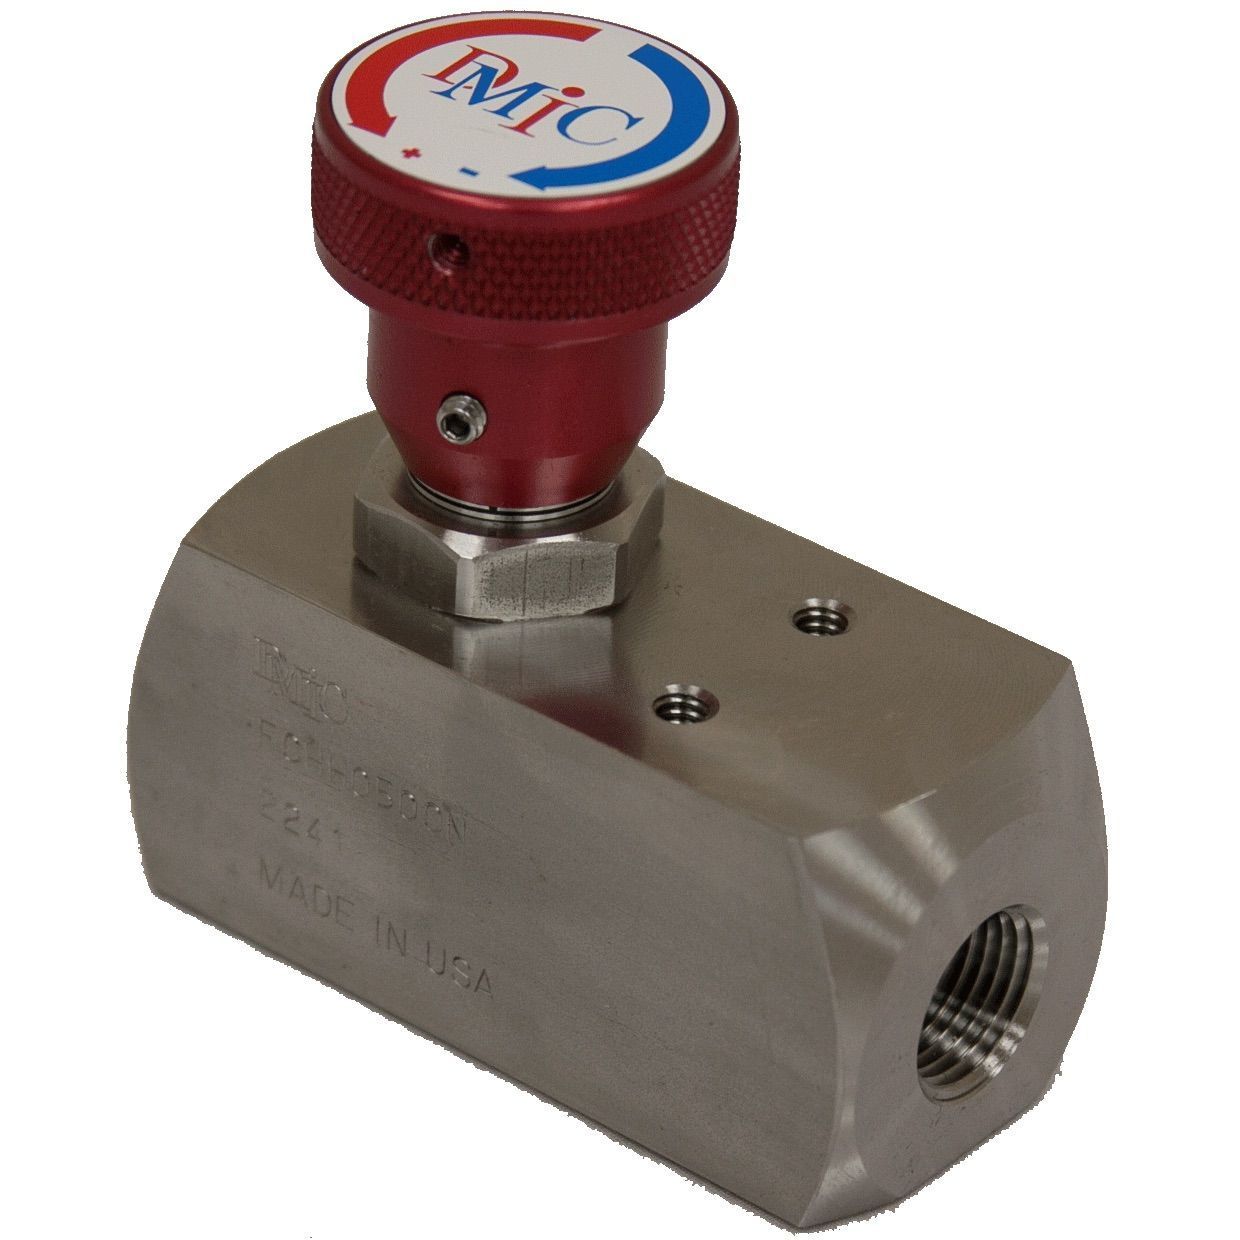 FCHH-0500N-1141 : DMIC Flow Control, Unidirectional, with Integrated Check, 1/2" NPT, Carbon Steel, 10000psi